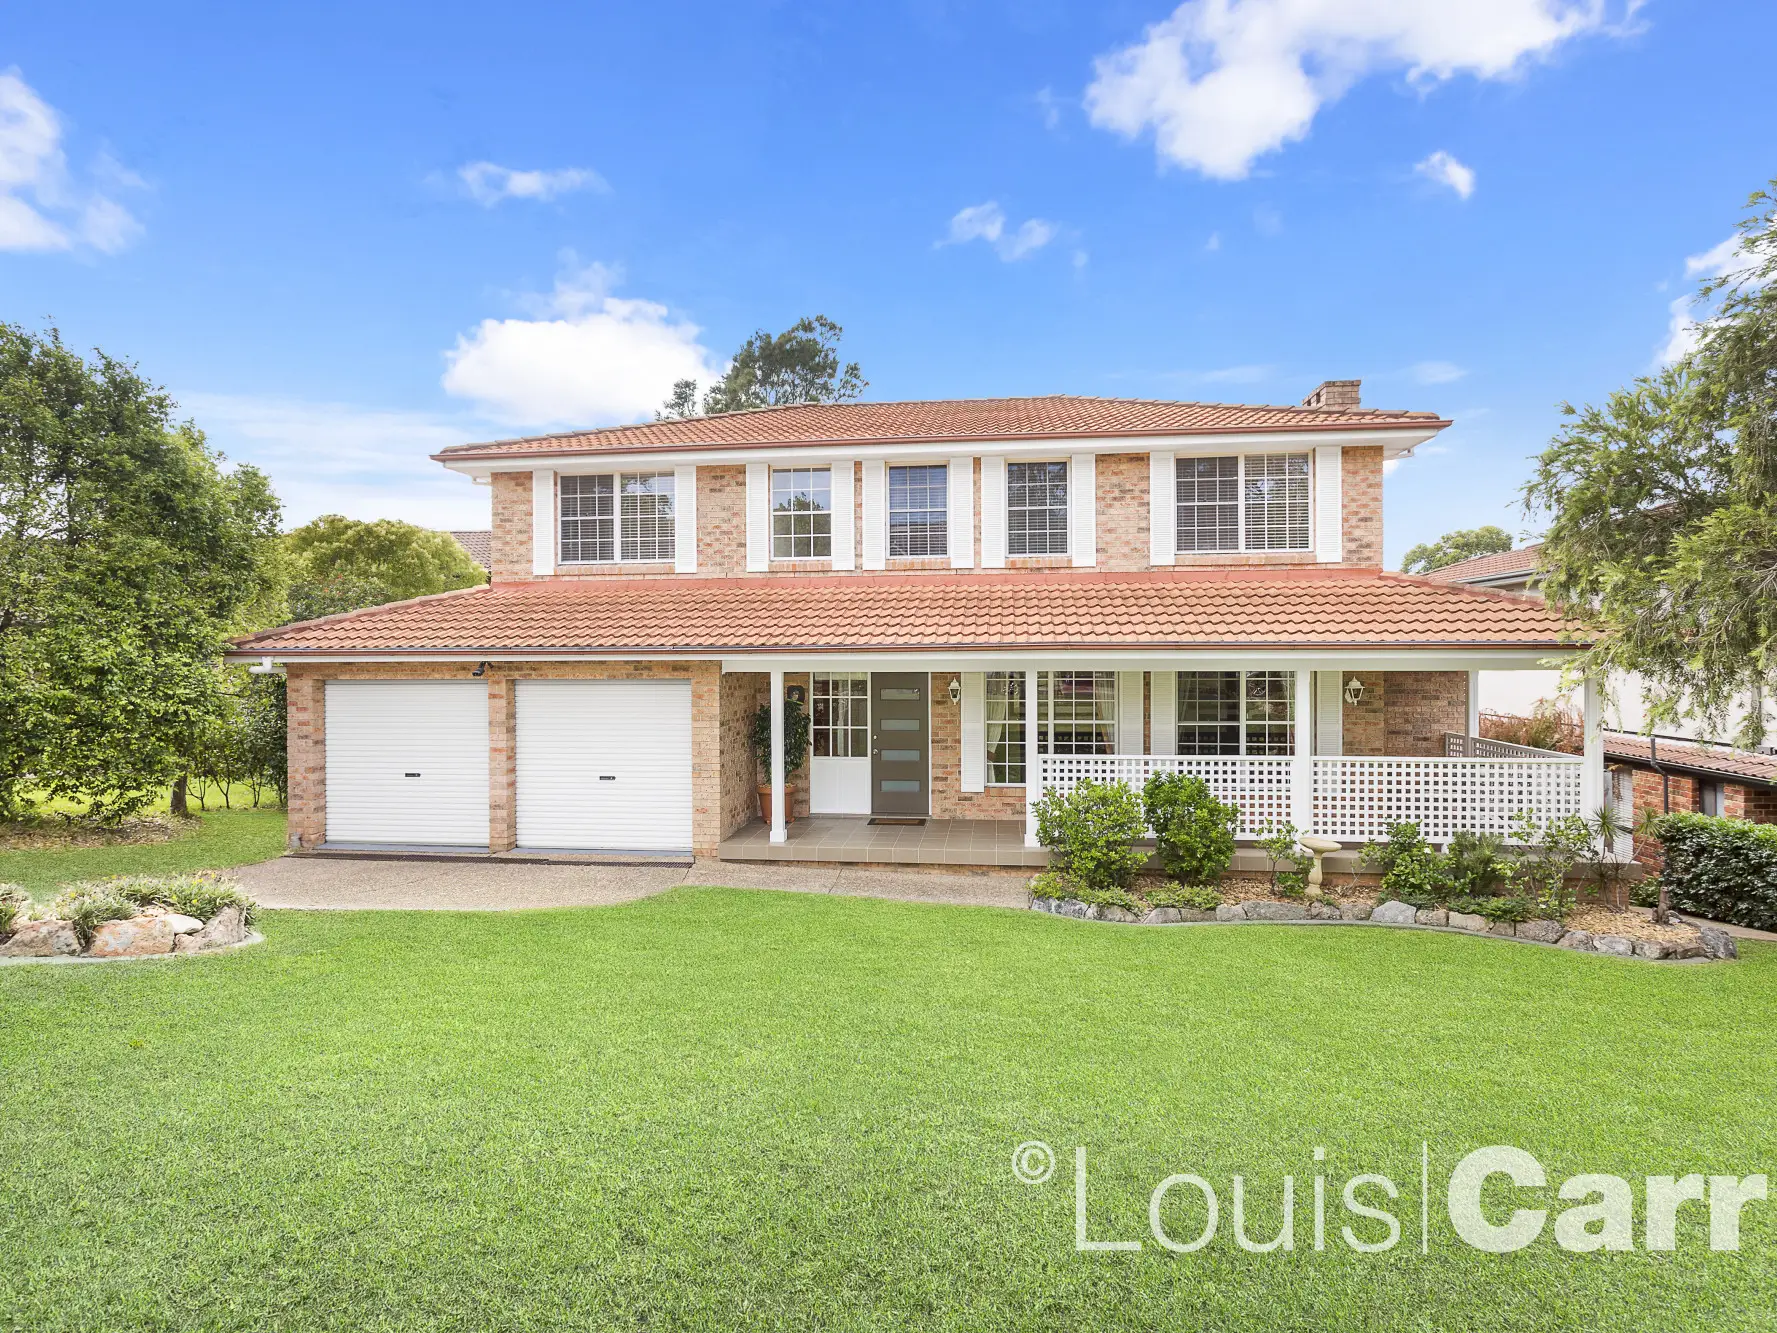 Photo #1: 6 Pineview Place, Dural - Sold by Louis Carr Real Estate